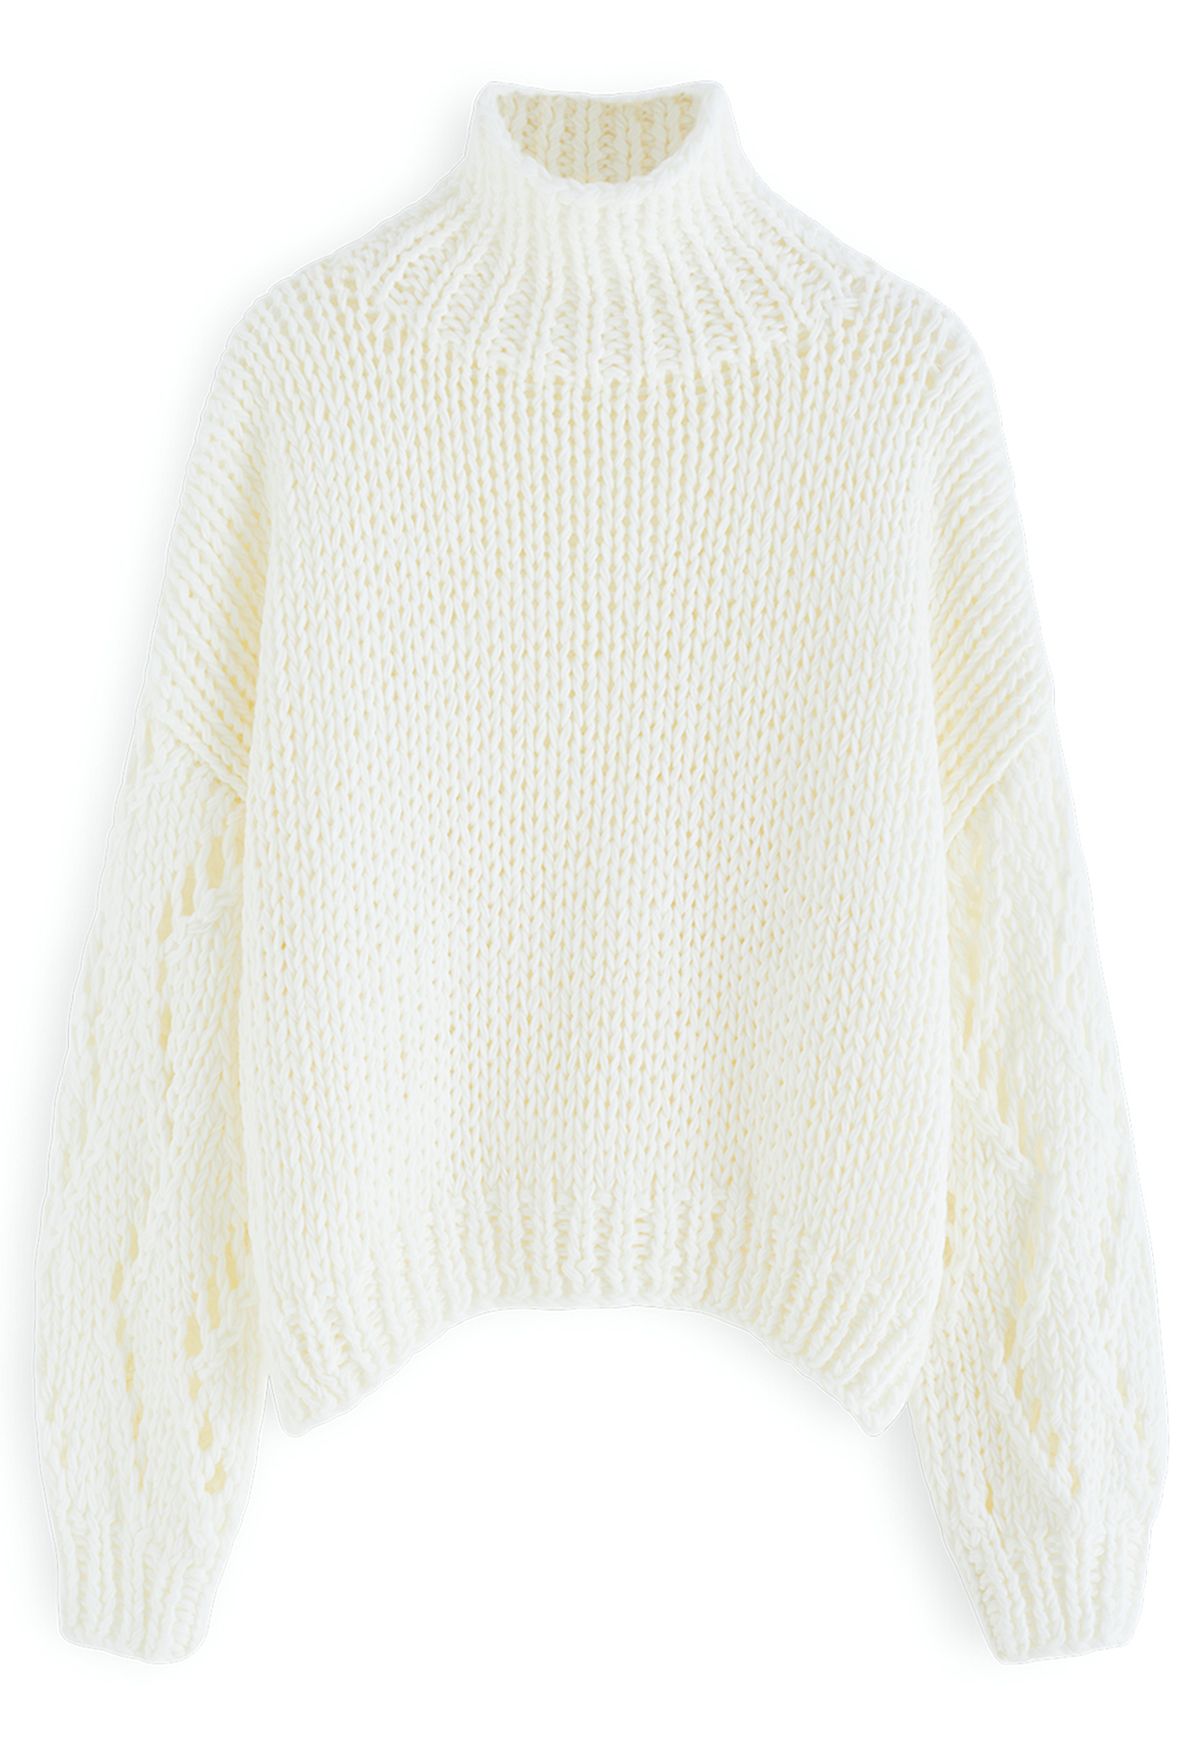 Pointelle Sleeve High Neck Hand-Knit Sweater in White